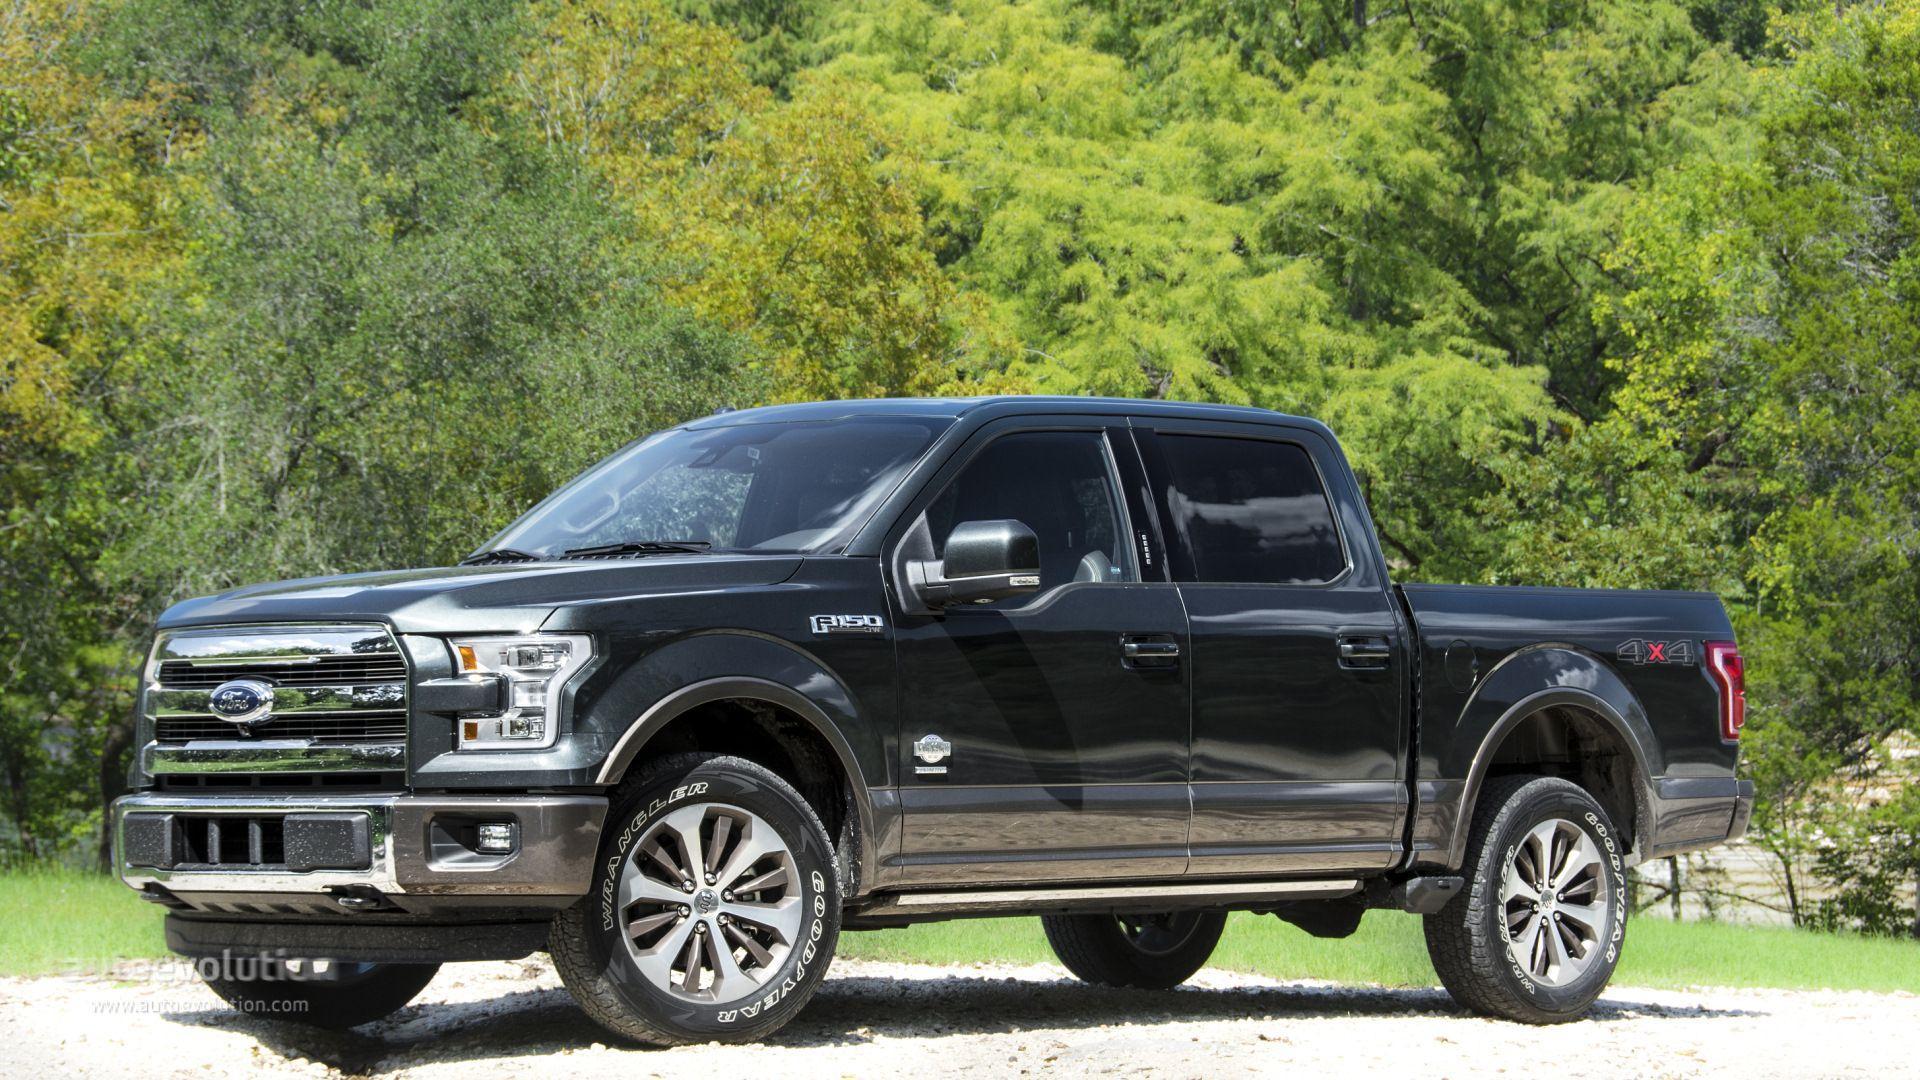 13+ Ford F150 2017 King Ranch Wallpaper 4k free download